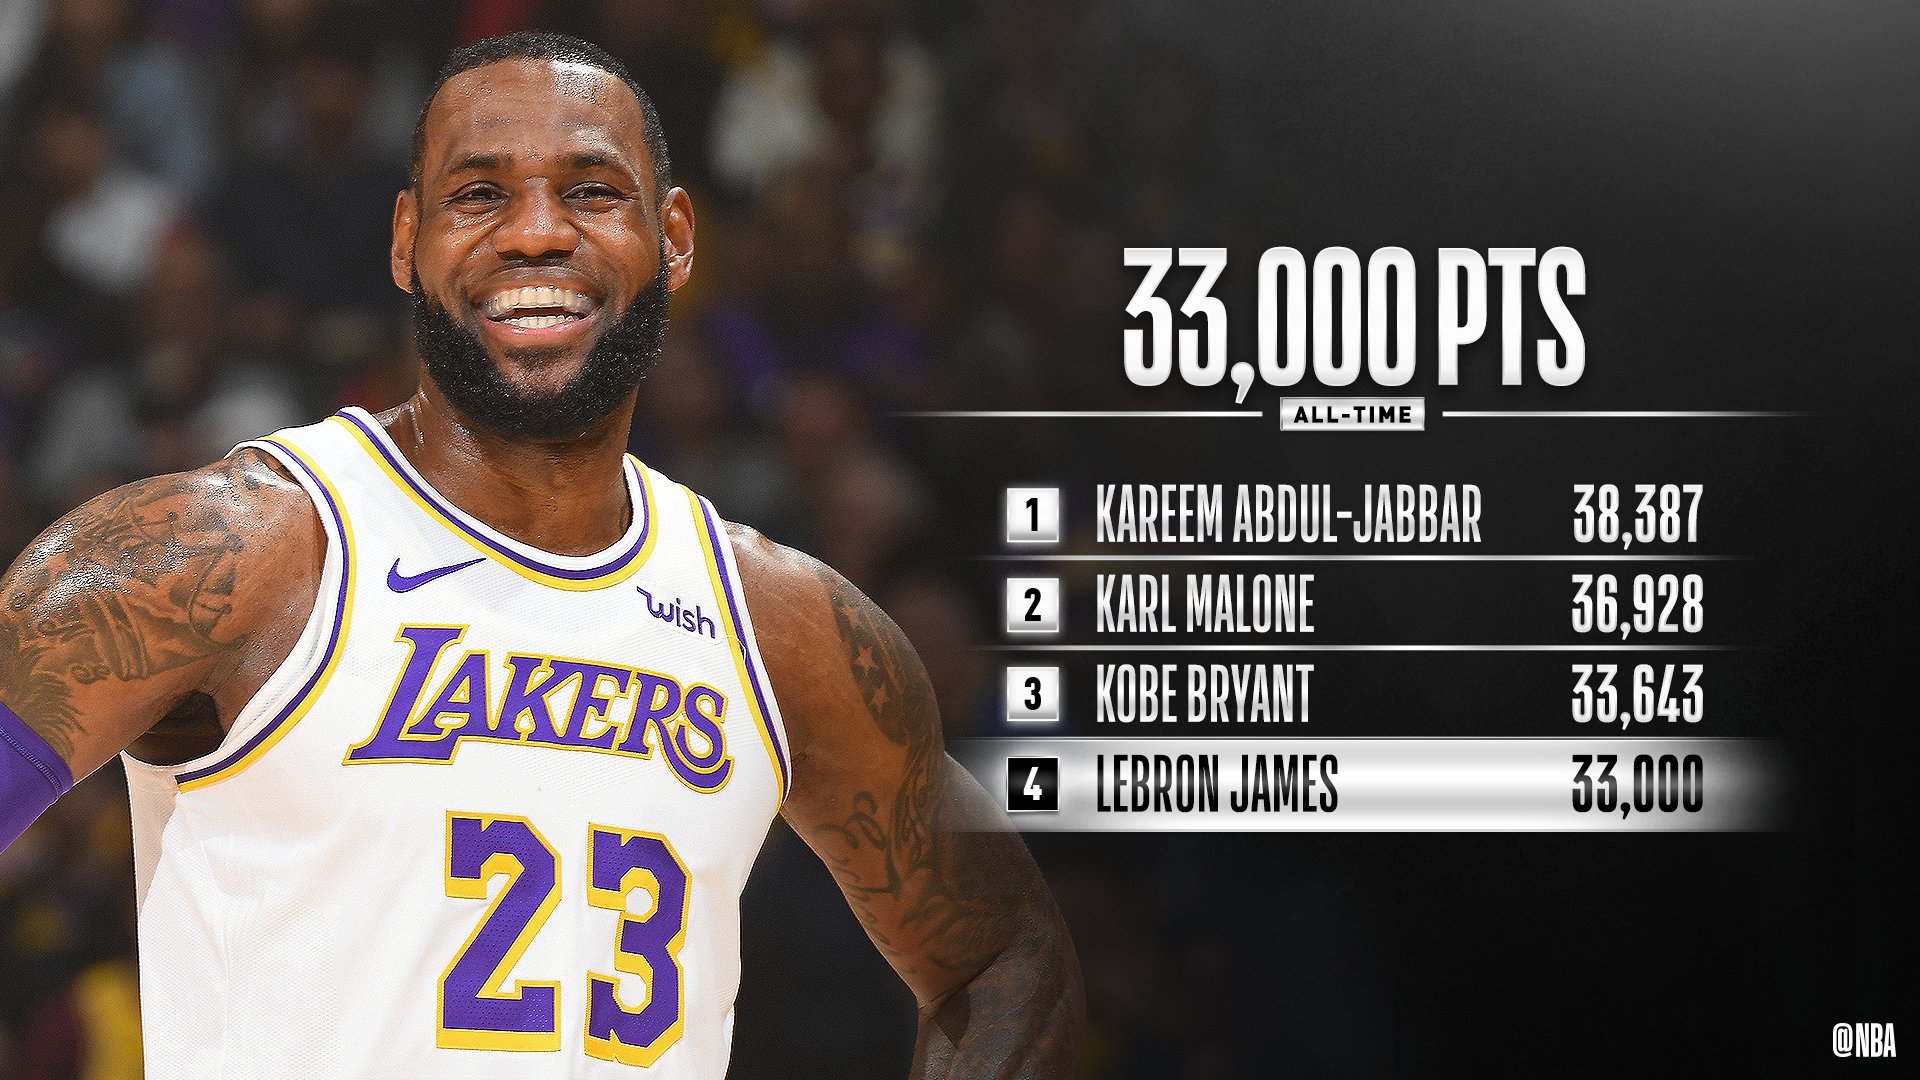 LeBron James 4th Player Ever to Score 33,000 Points IzzSo